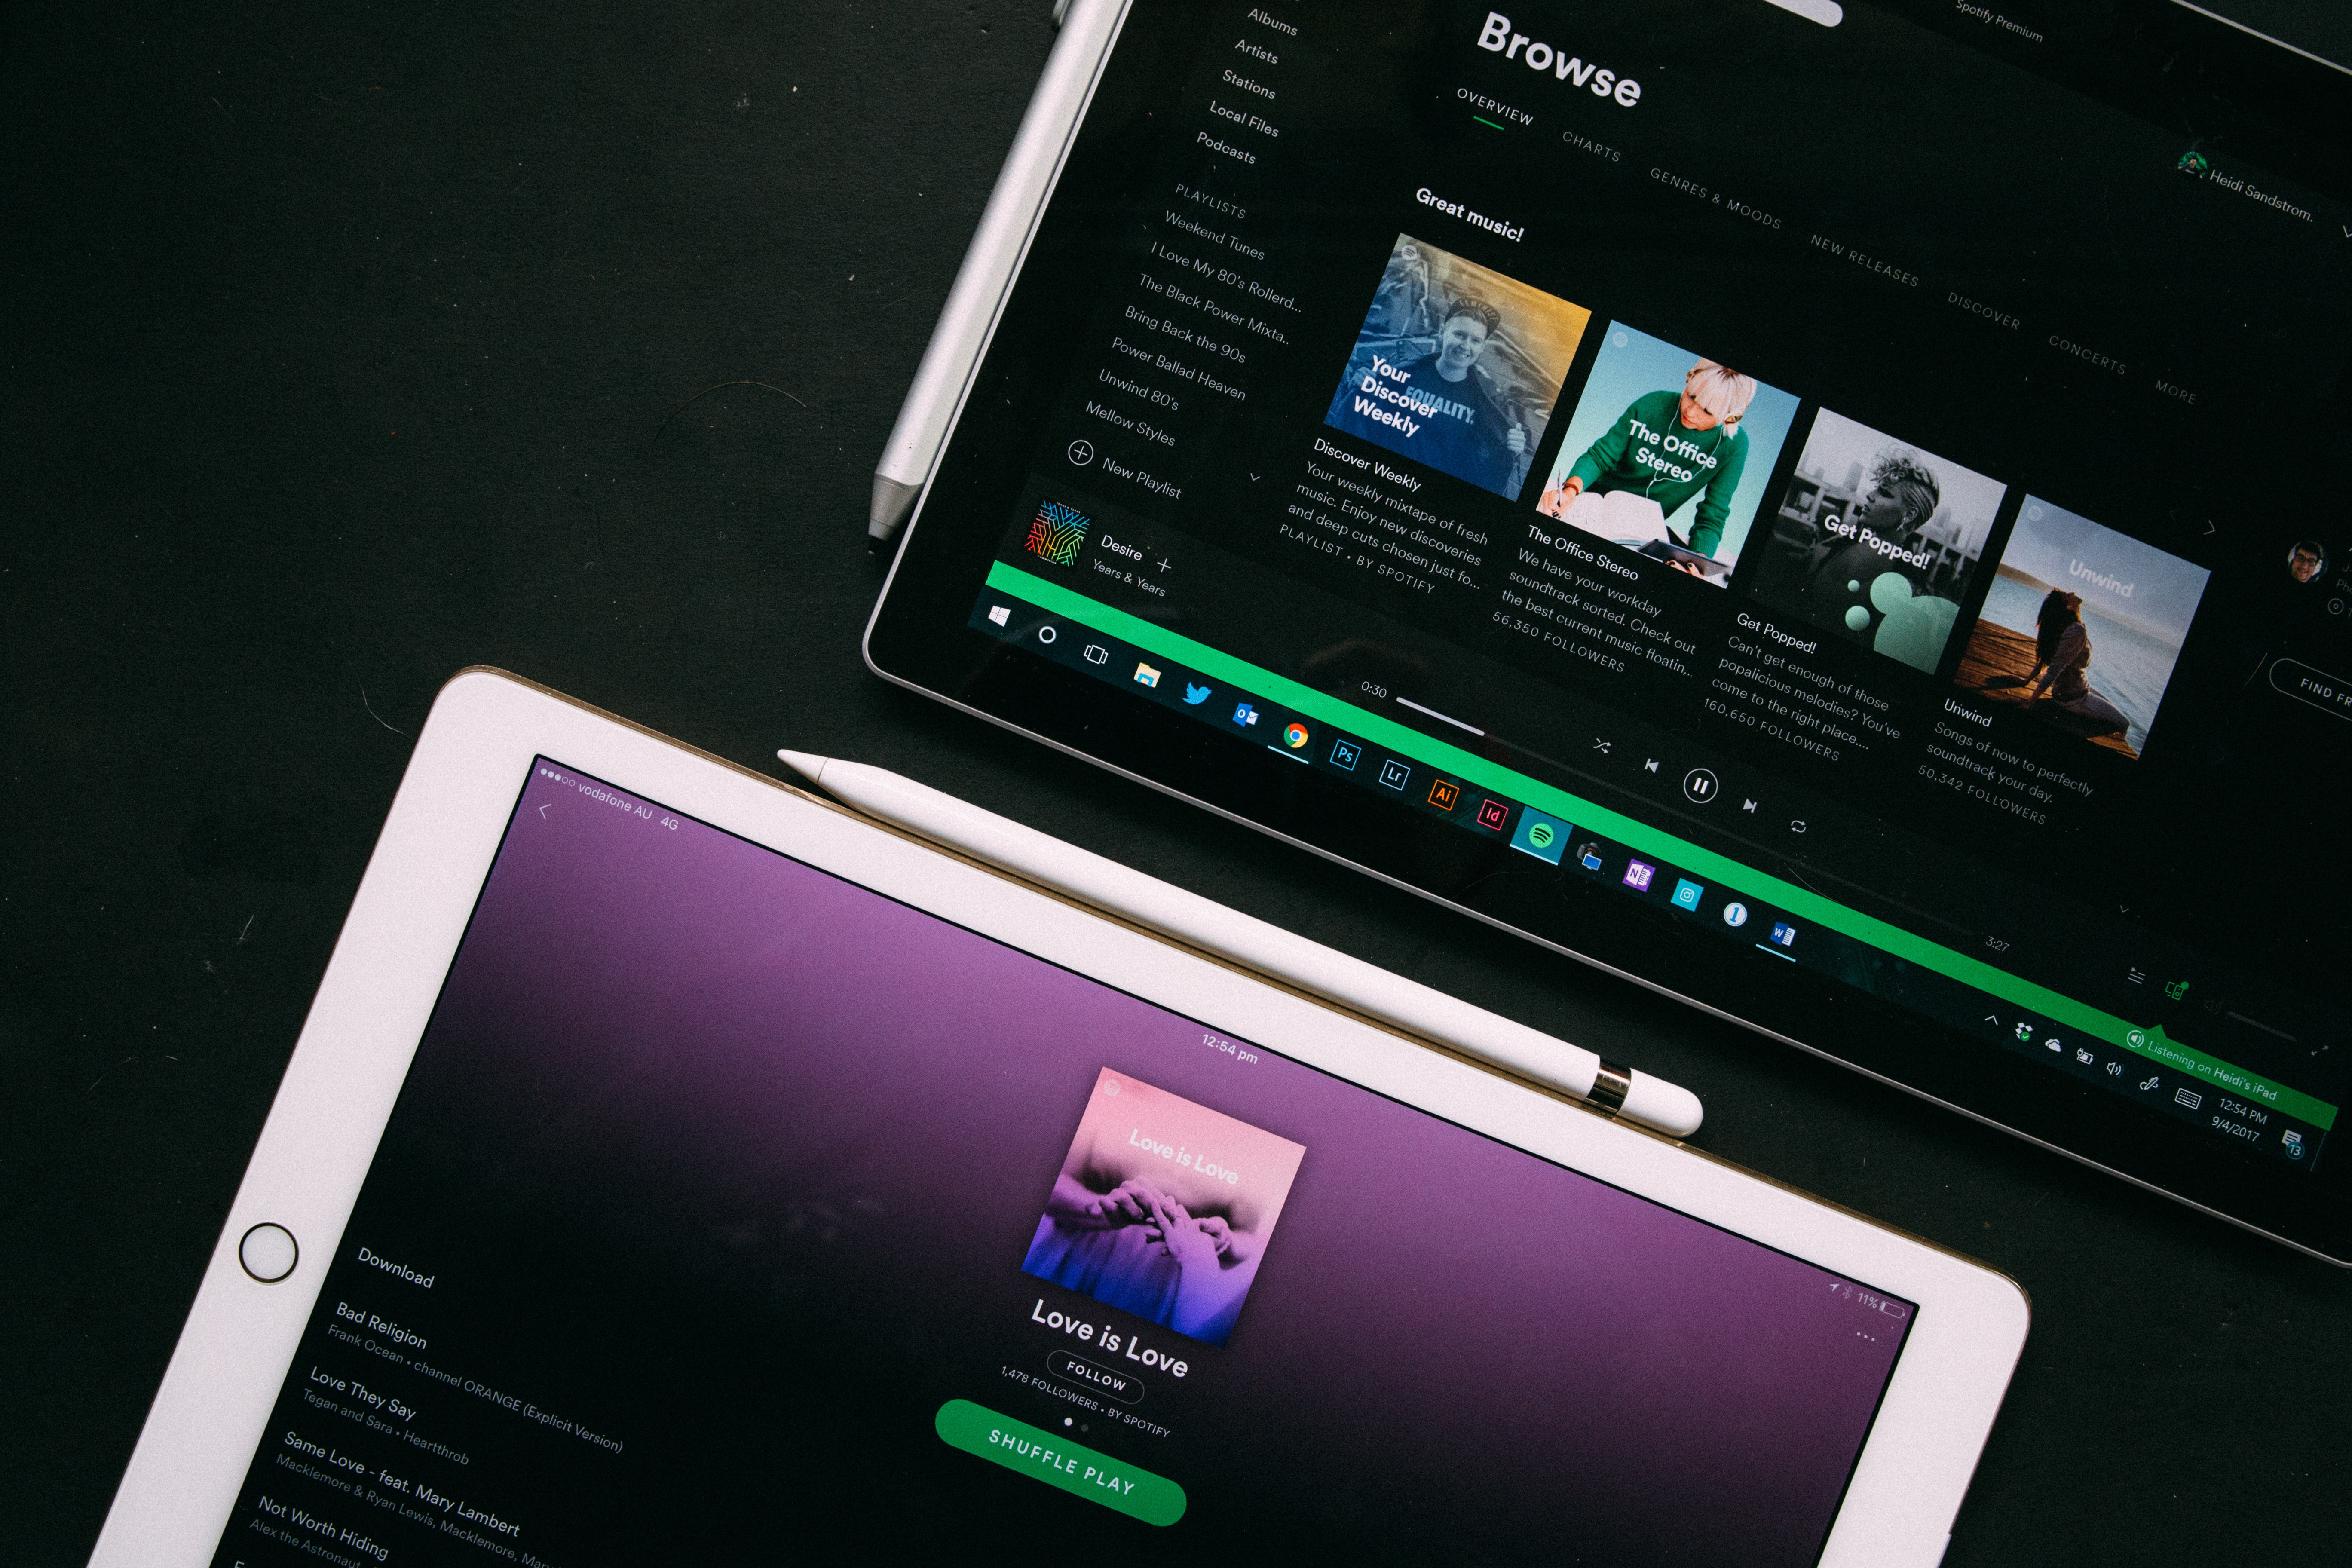 Photograph of two iPads open on the Spotify app.